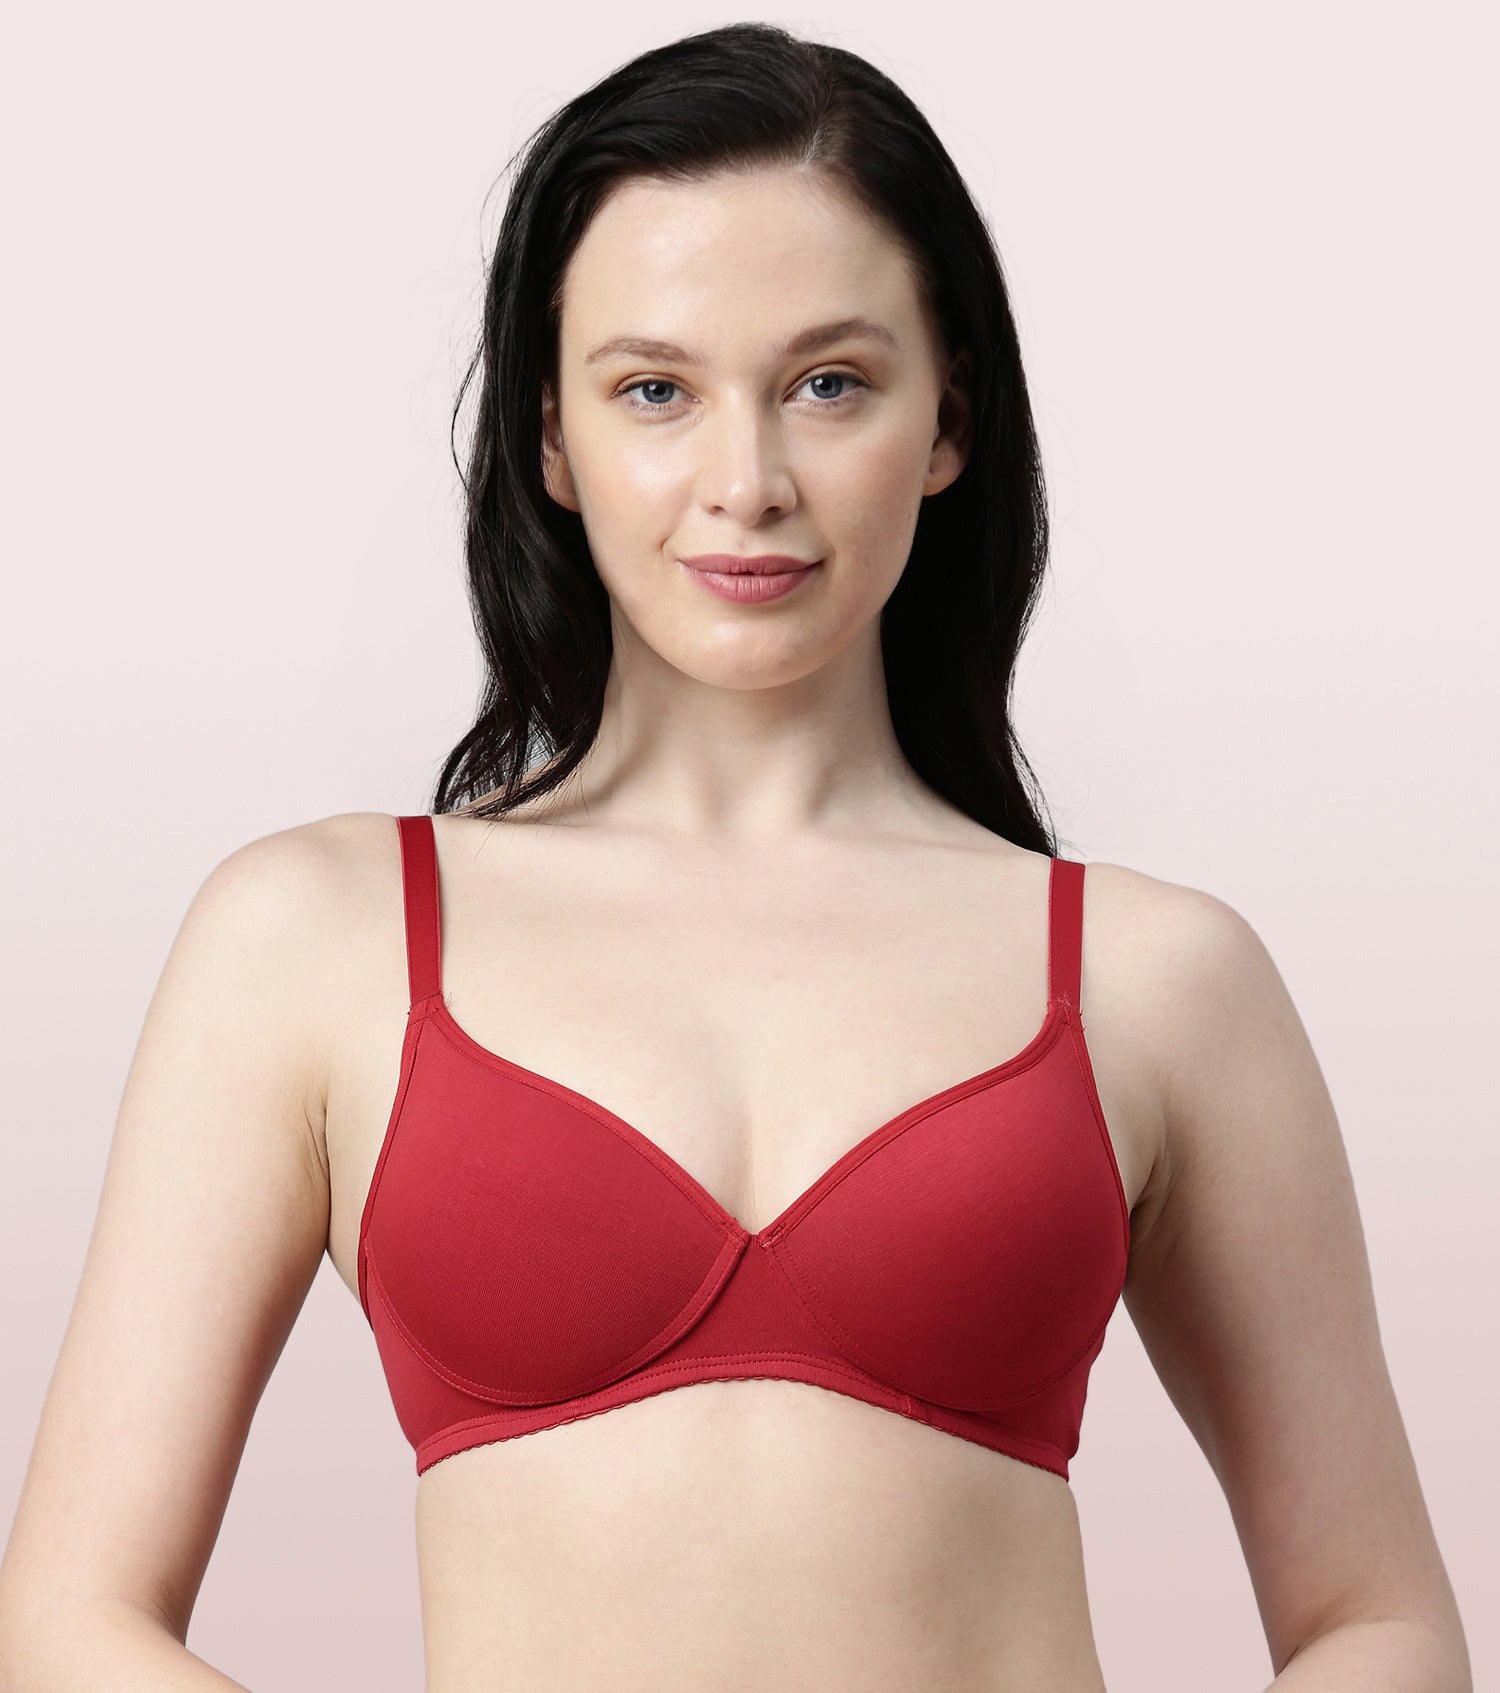 Buy Enamor A039 Perfect Coverage Cotton T-shirt Bra for Women